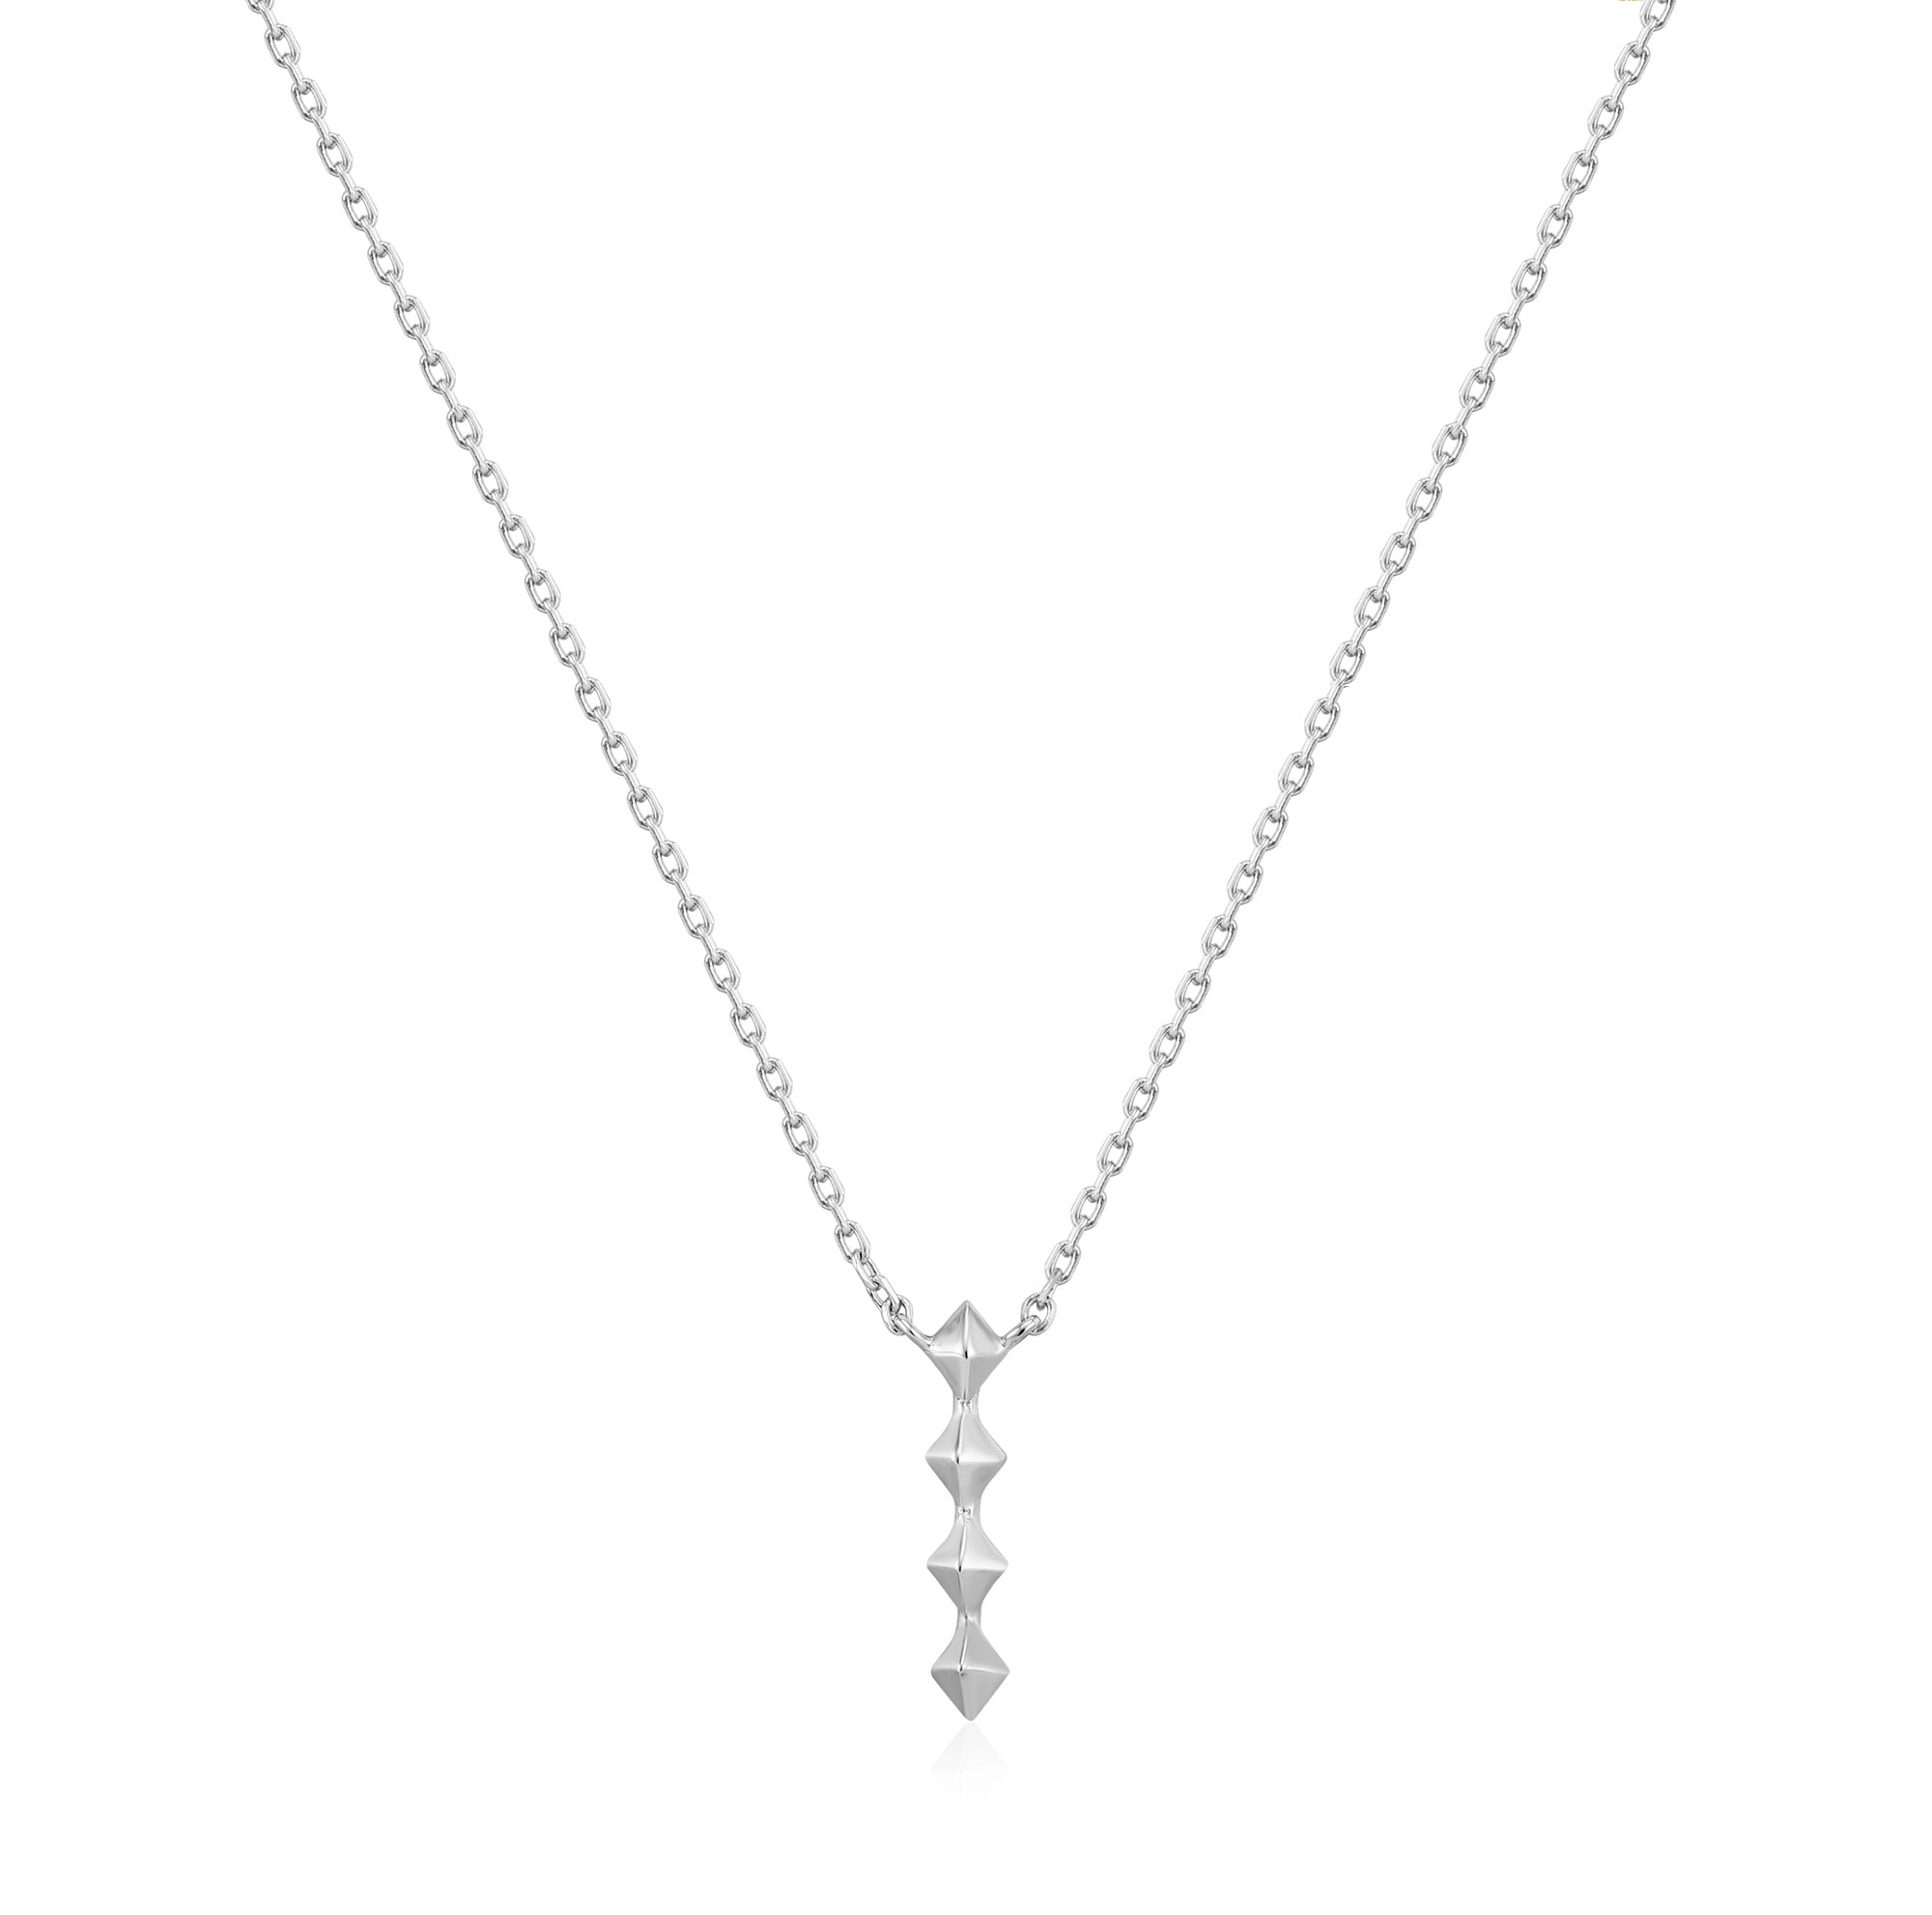 Ania Haie Spike Drop Necklace | More Than Just A Gift